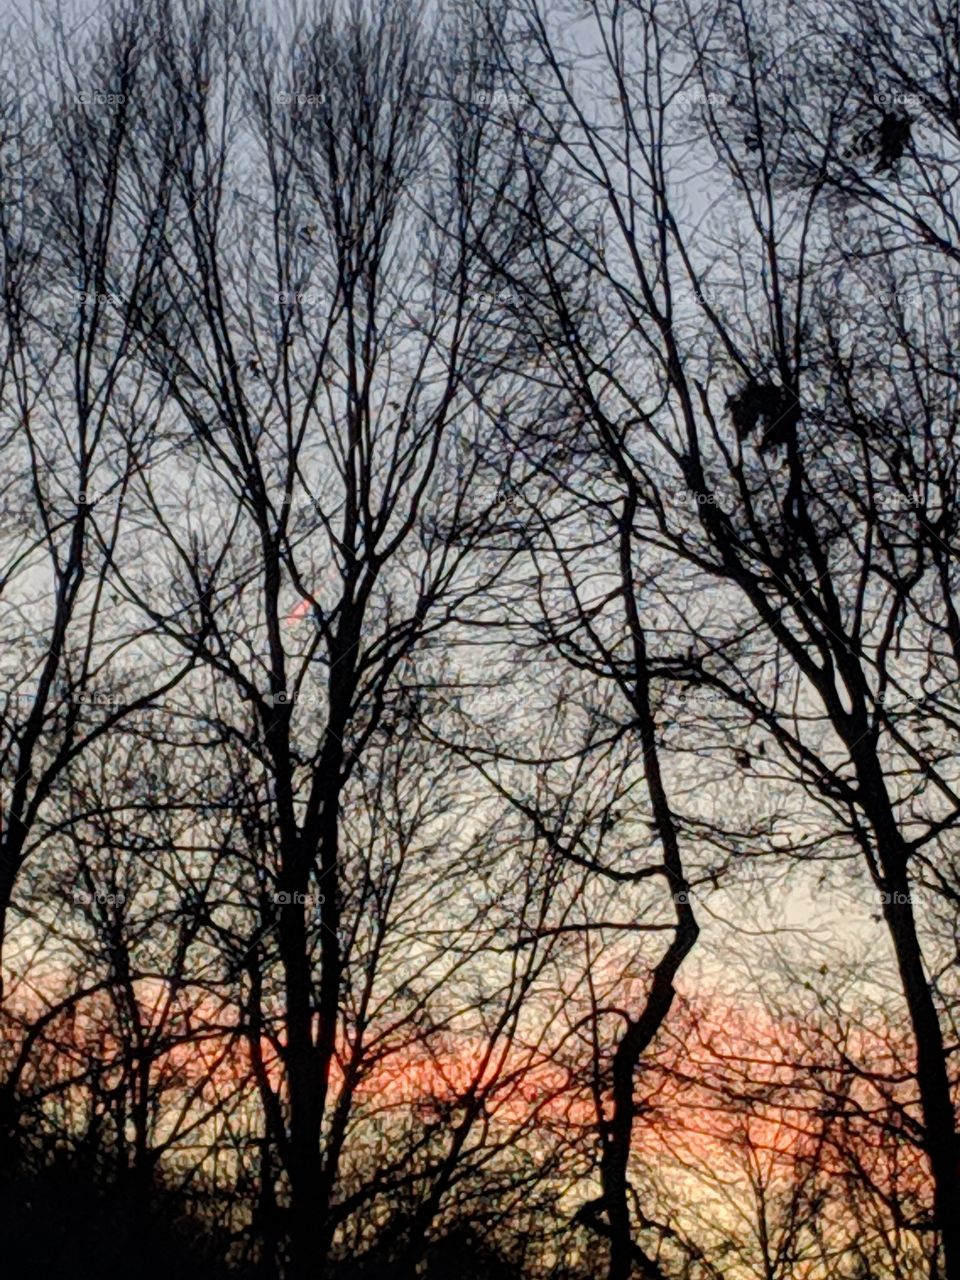 Winter trees at dusk. Cold sky chilly.